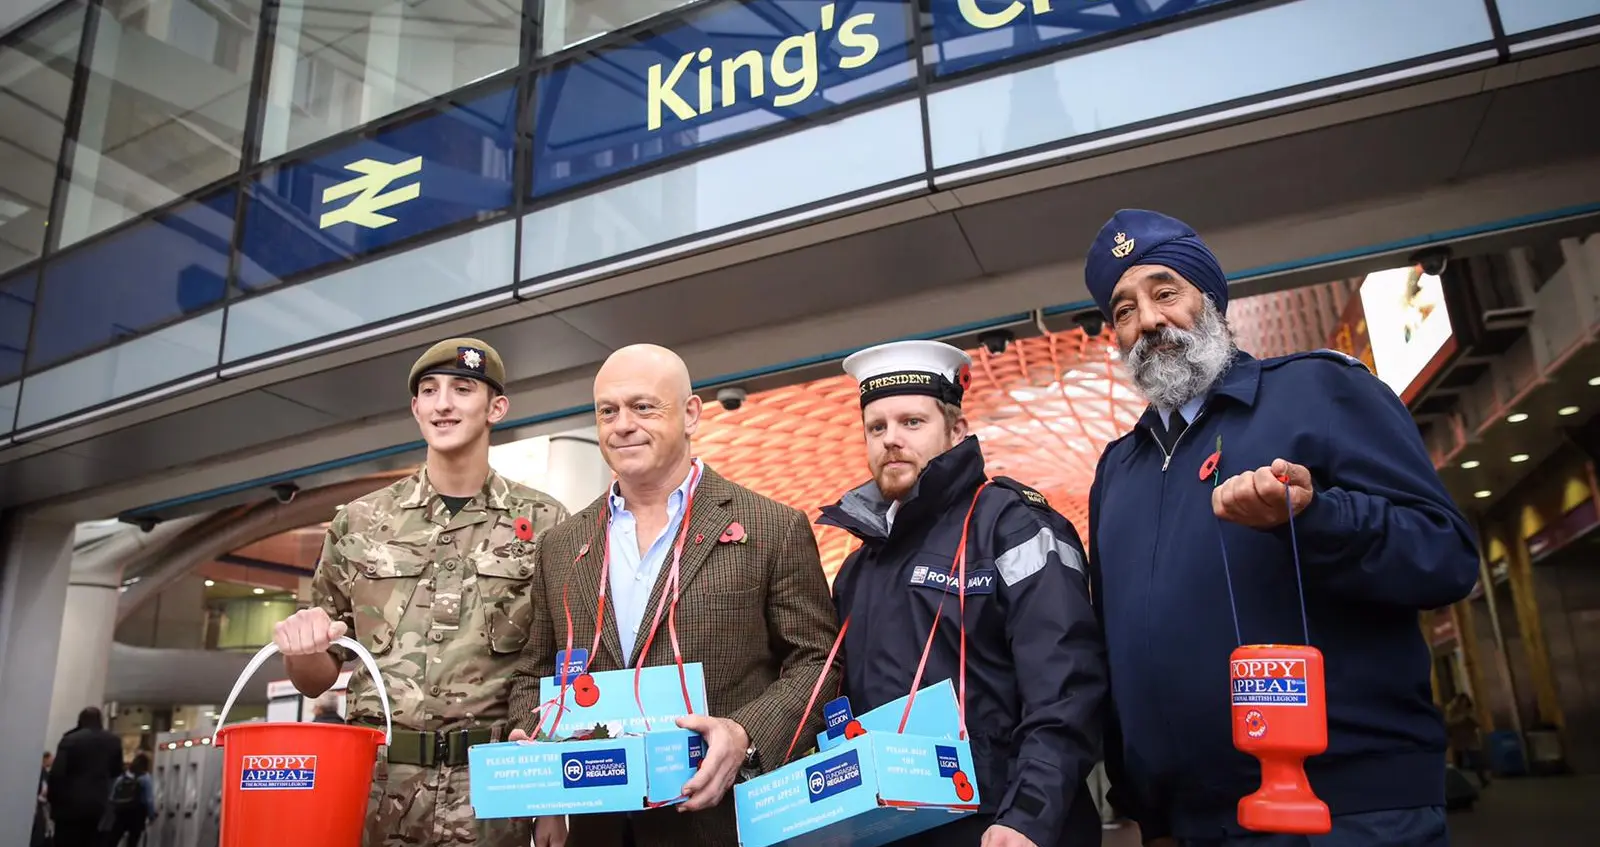 Ross Kemp with poppy collectors